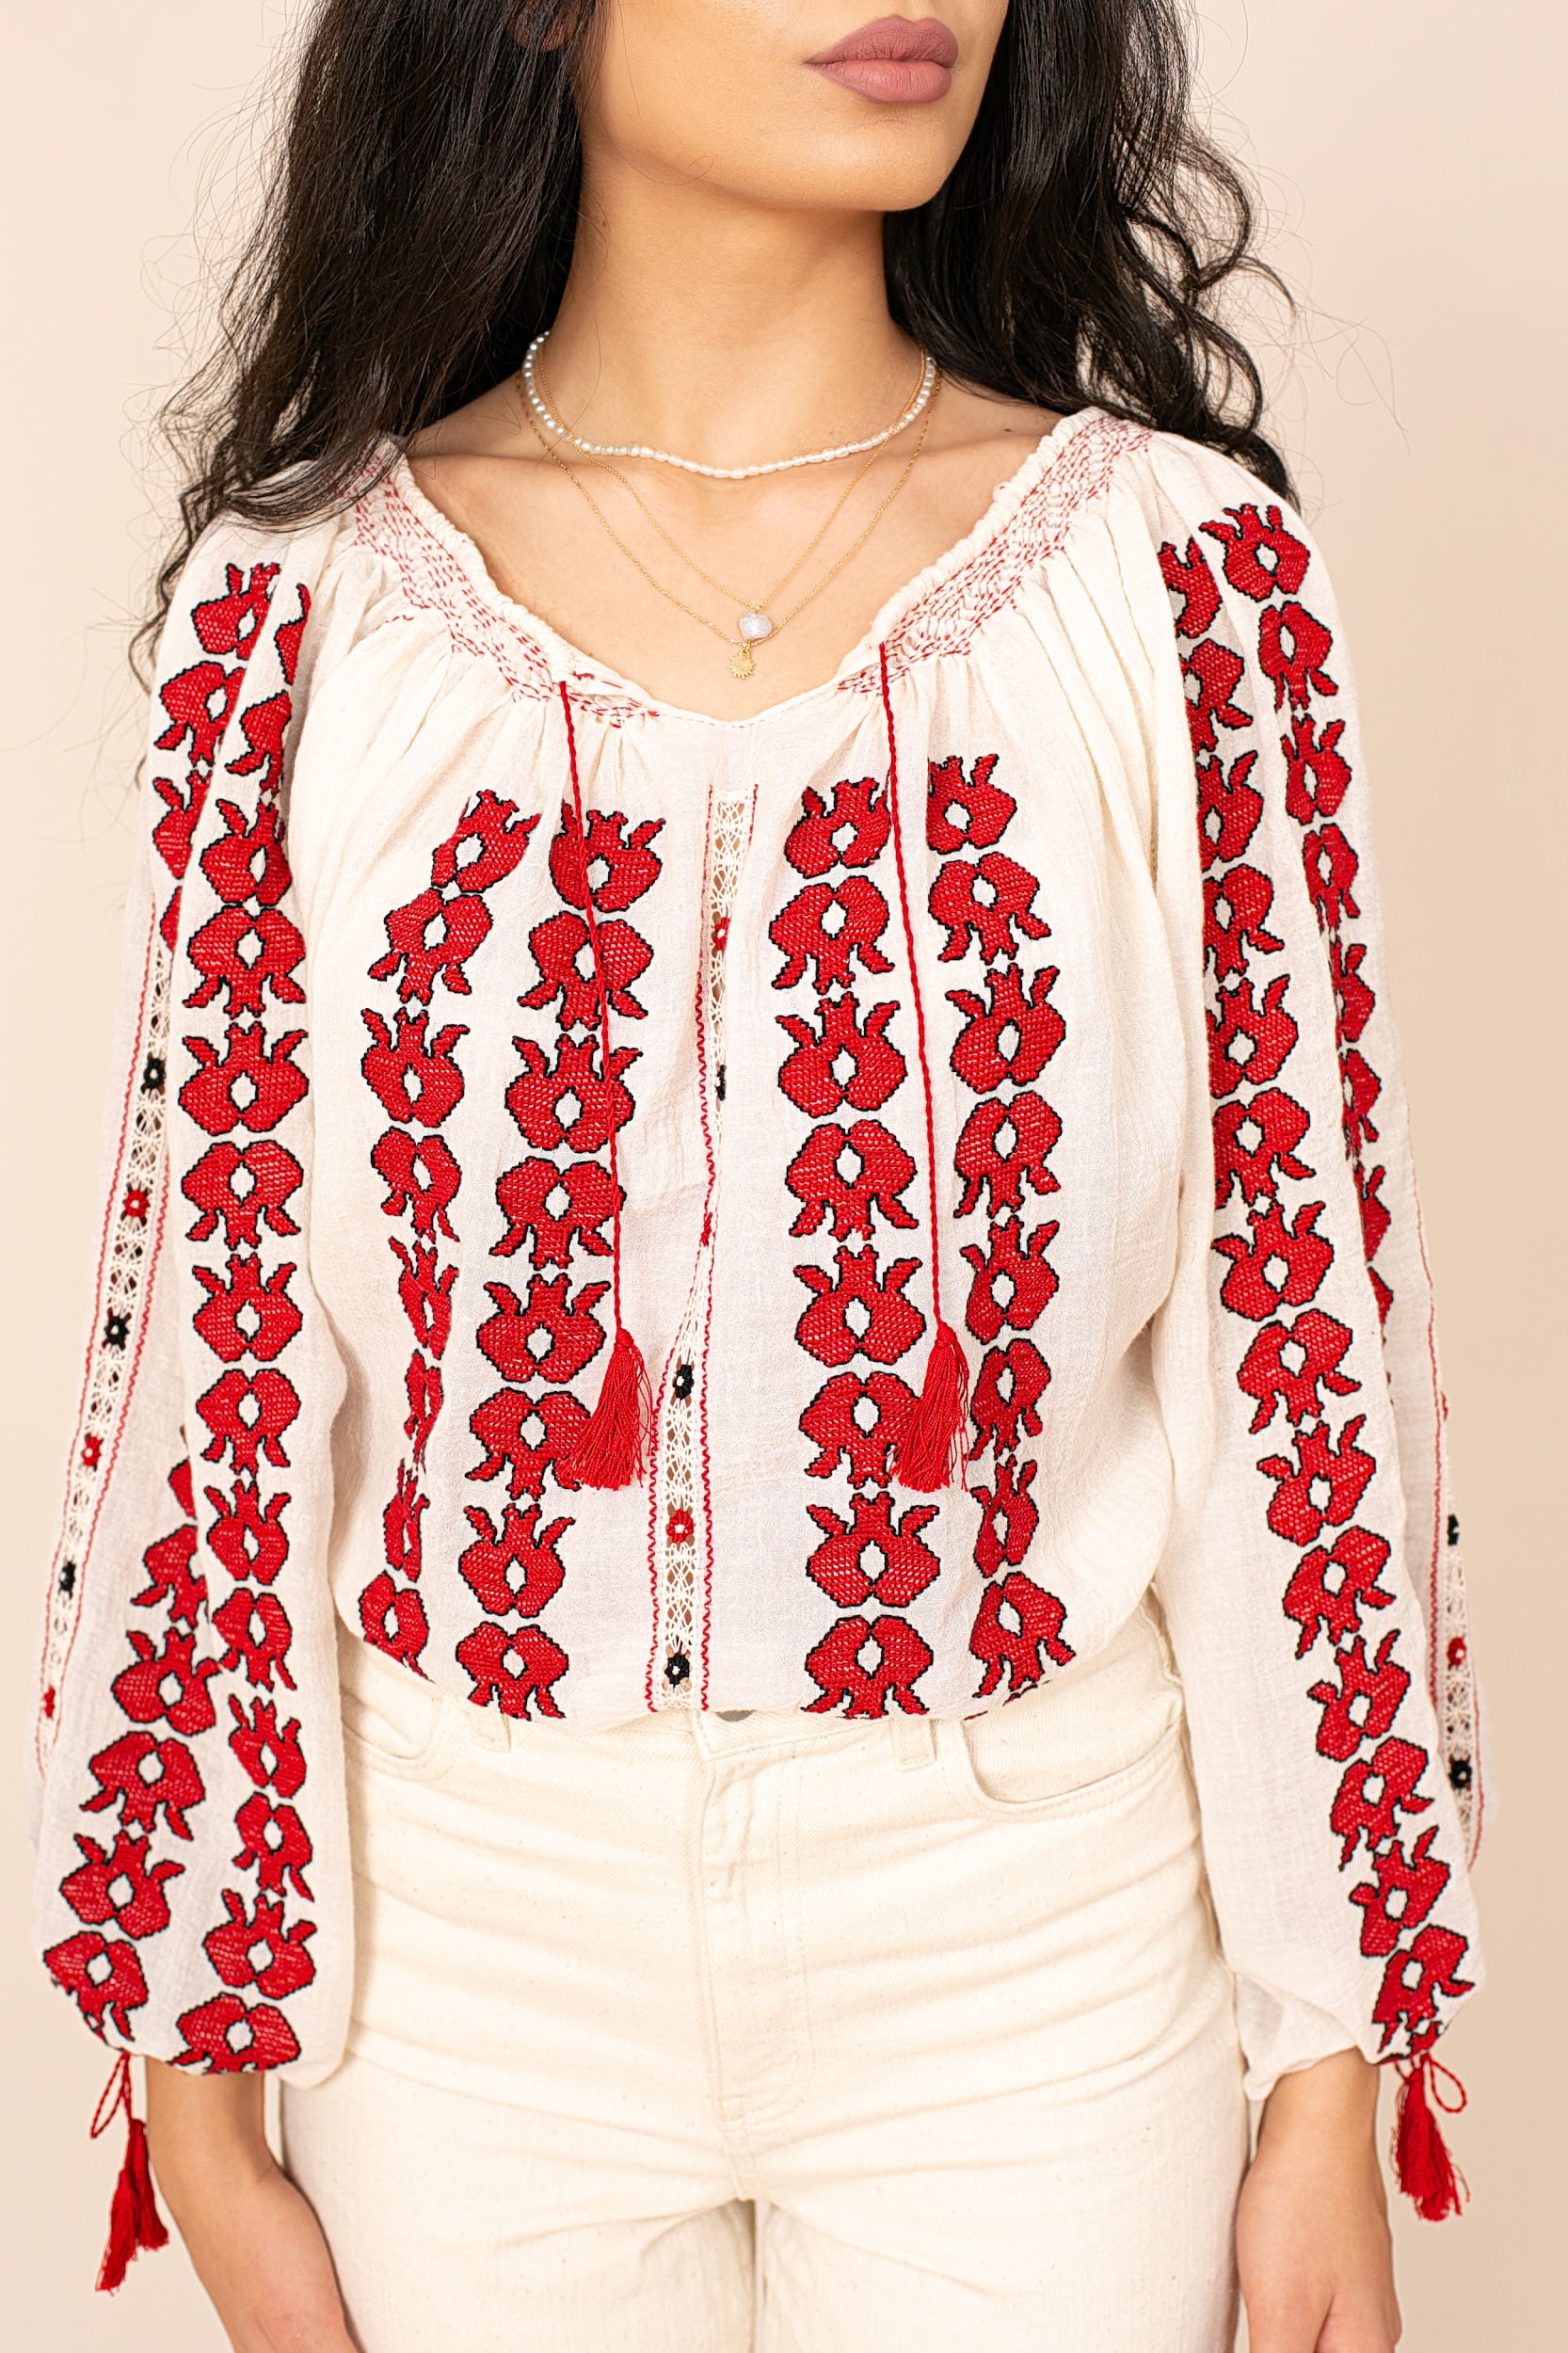 Laleli – Fine Cotton Romanian Handcrafted Top With Tulip Embroidery